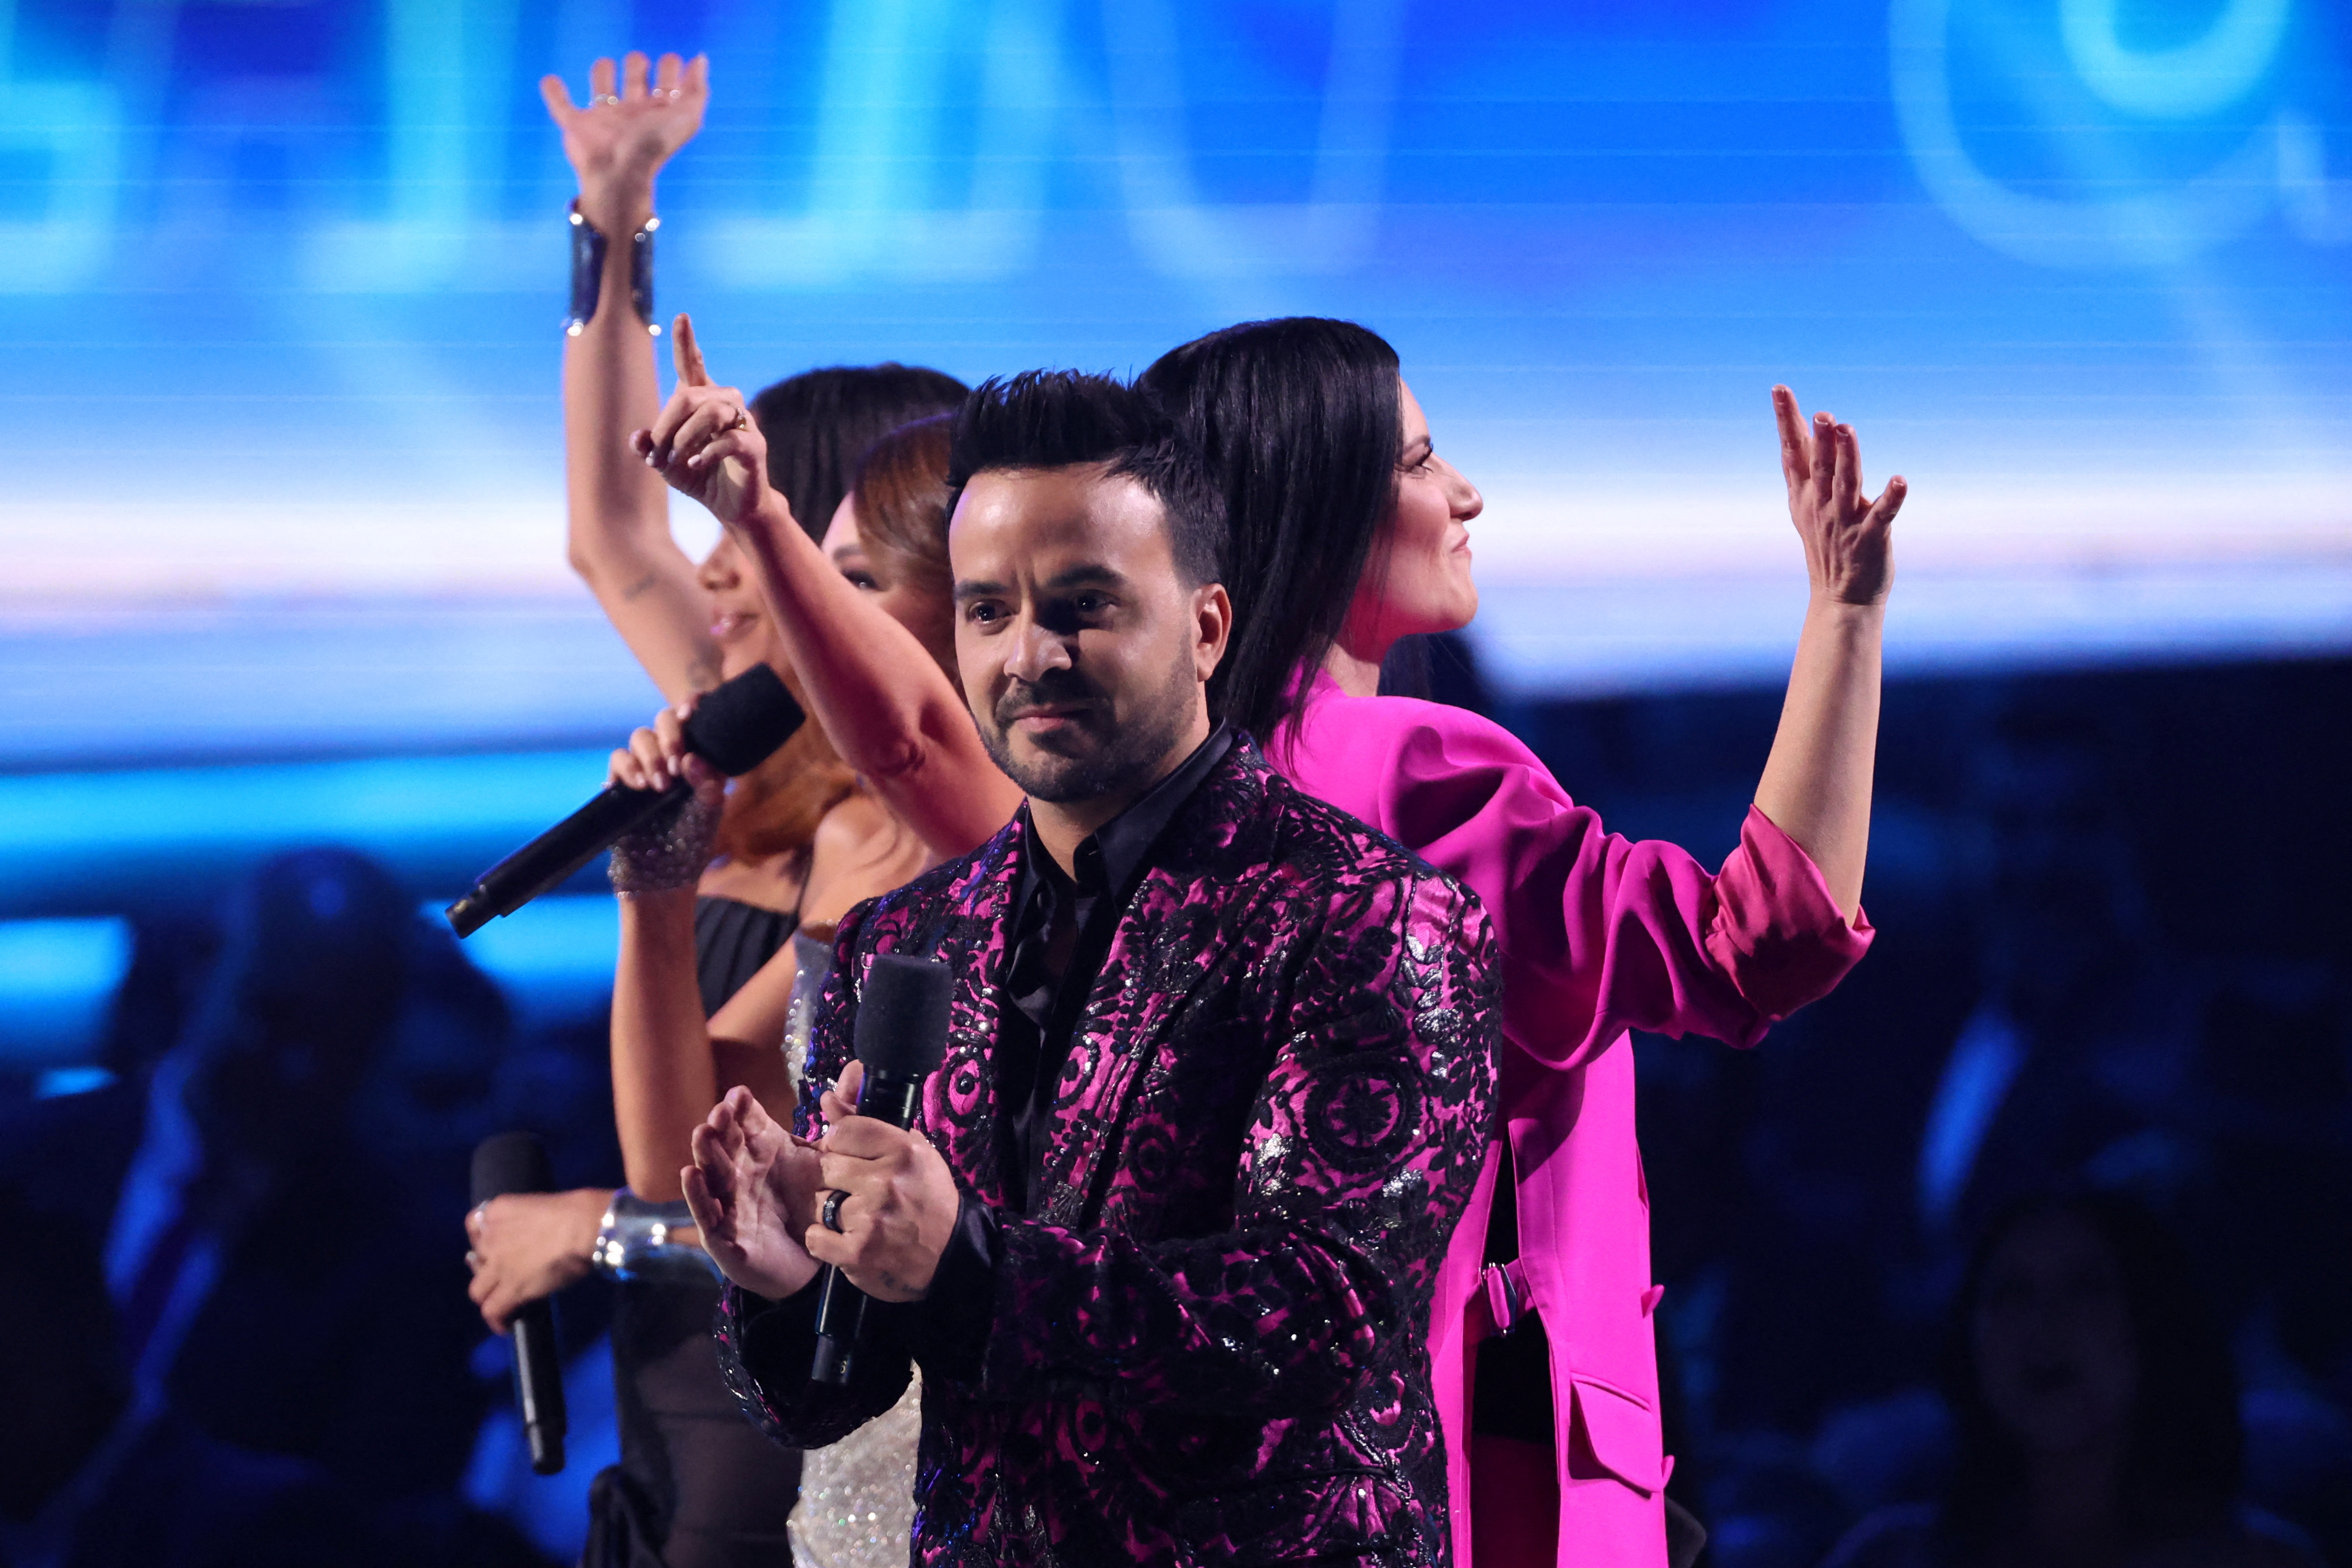 Laura Pausini, Luis Fonsi and Thalia greet the audience during the 23rd Annual Latin Grammy Awards show in Las Vegas, Nevada, U.S., November 17, 2022. REUTERS/Mario Anzuoni